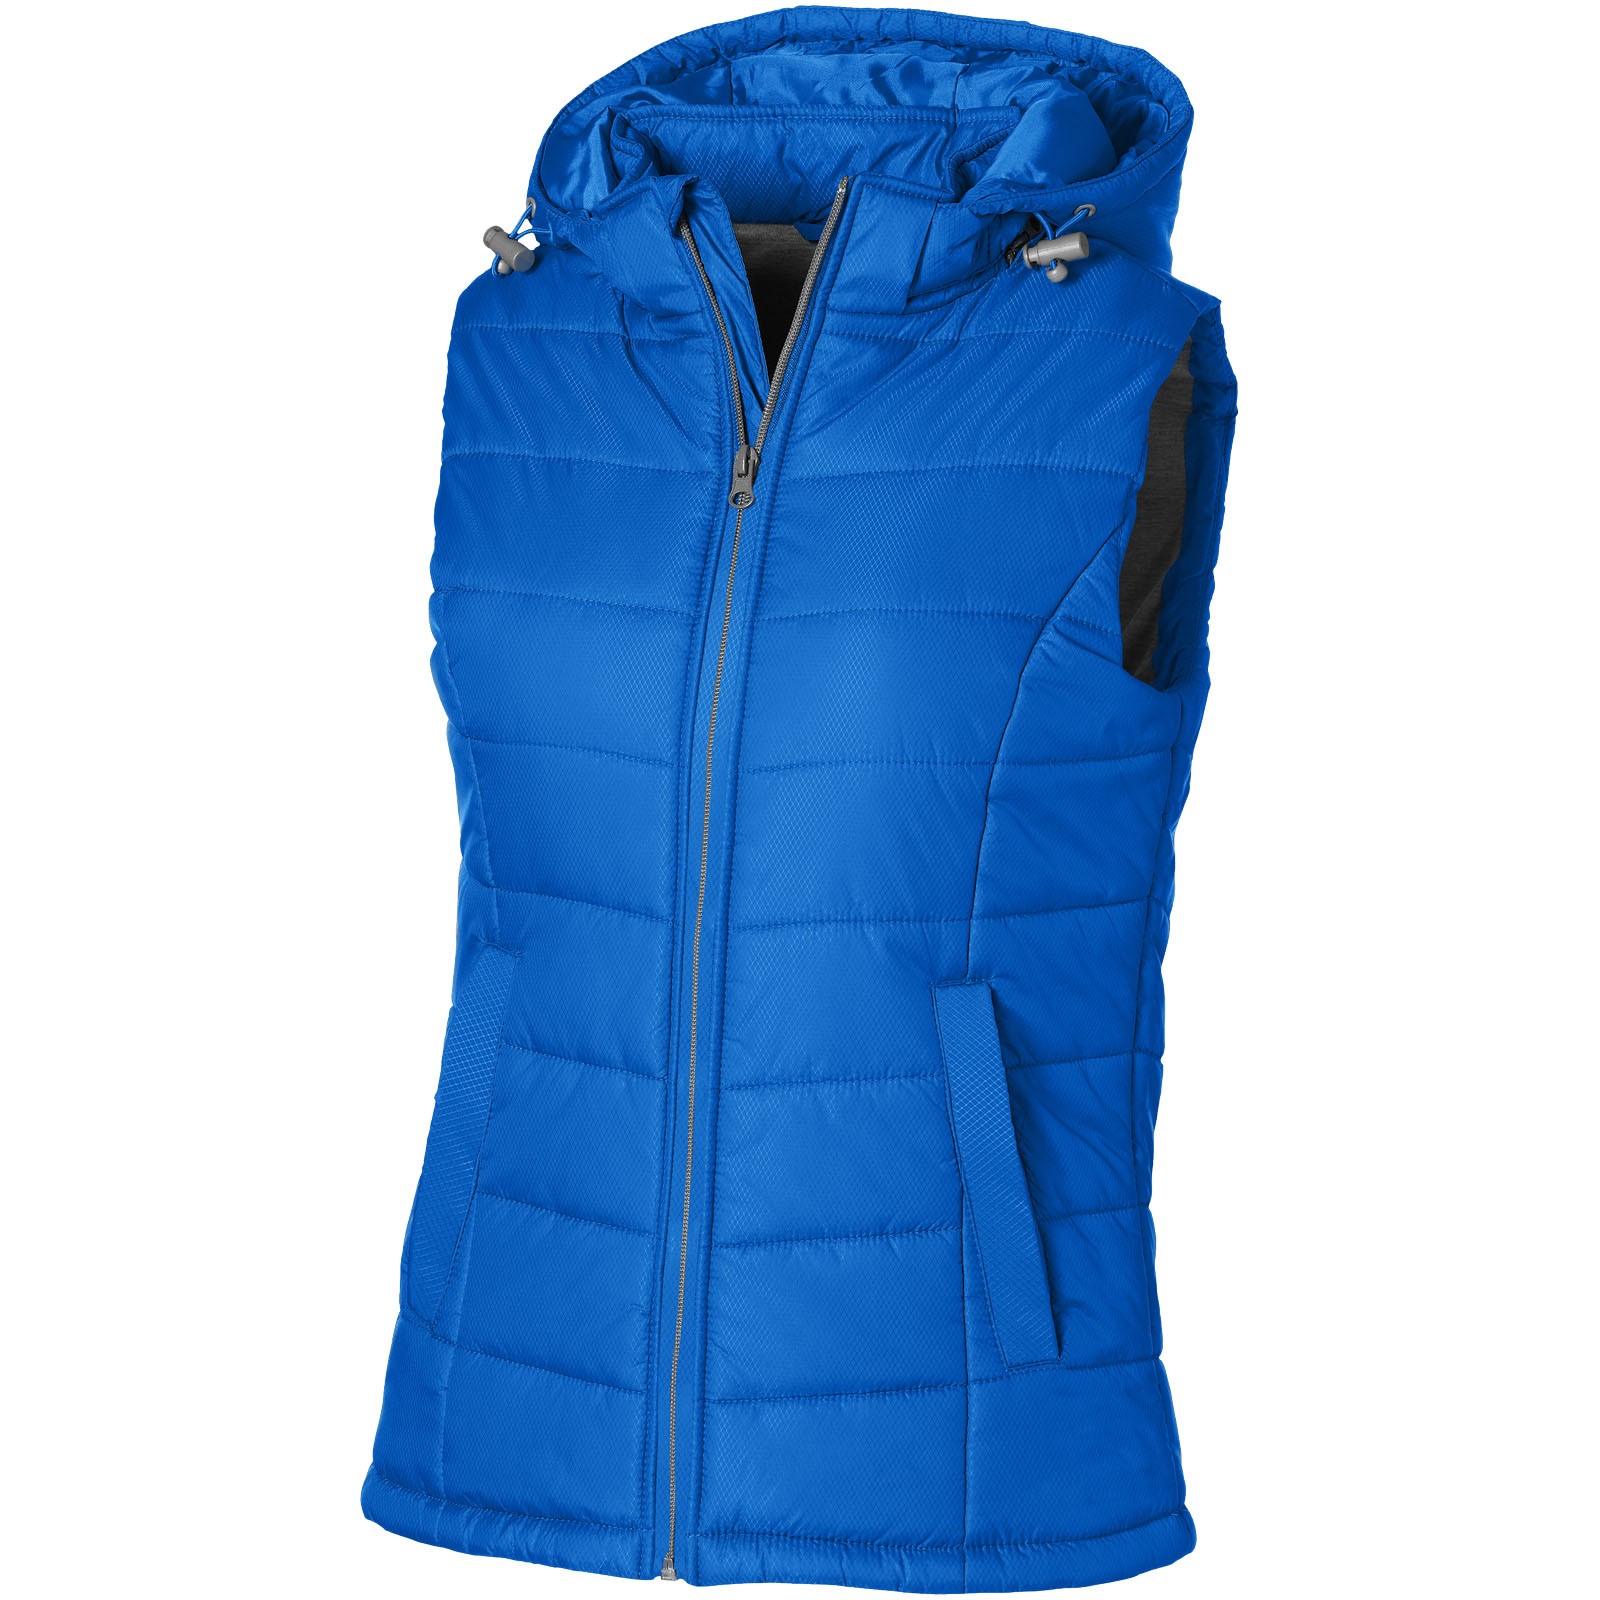 Mixed Doubles ladies bodywarmer - Sky Blue / S